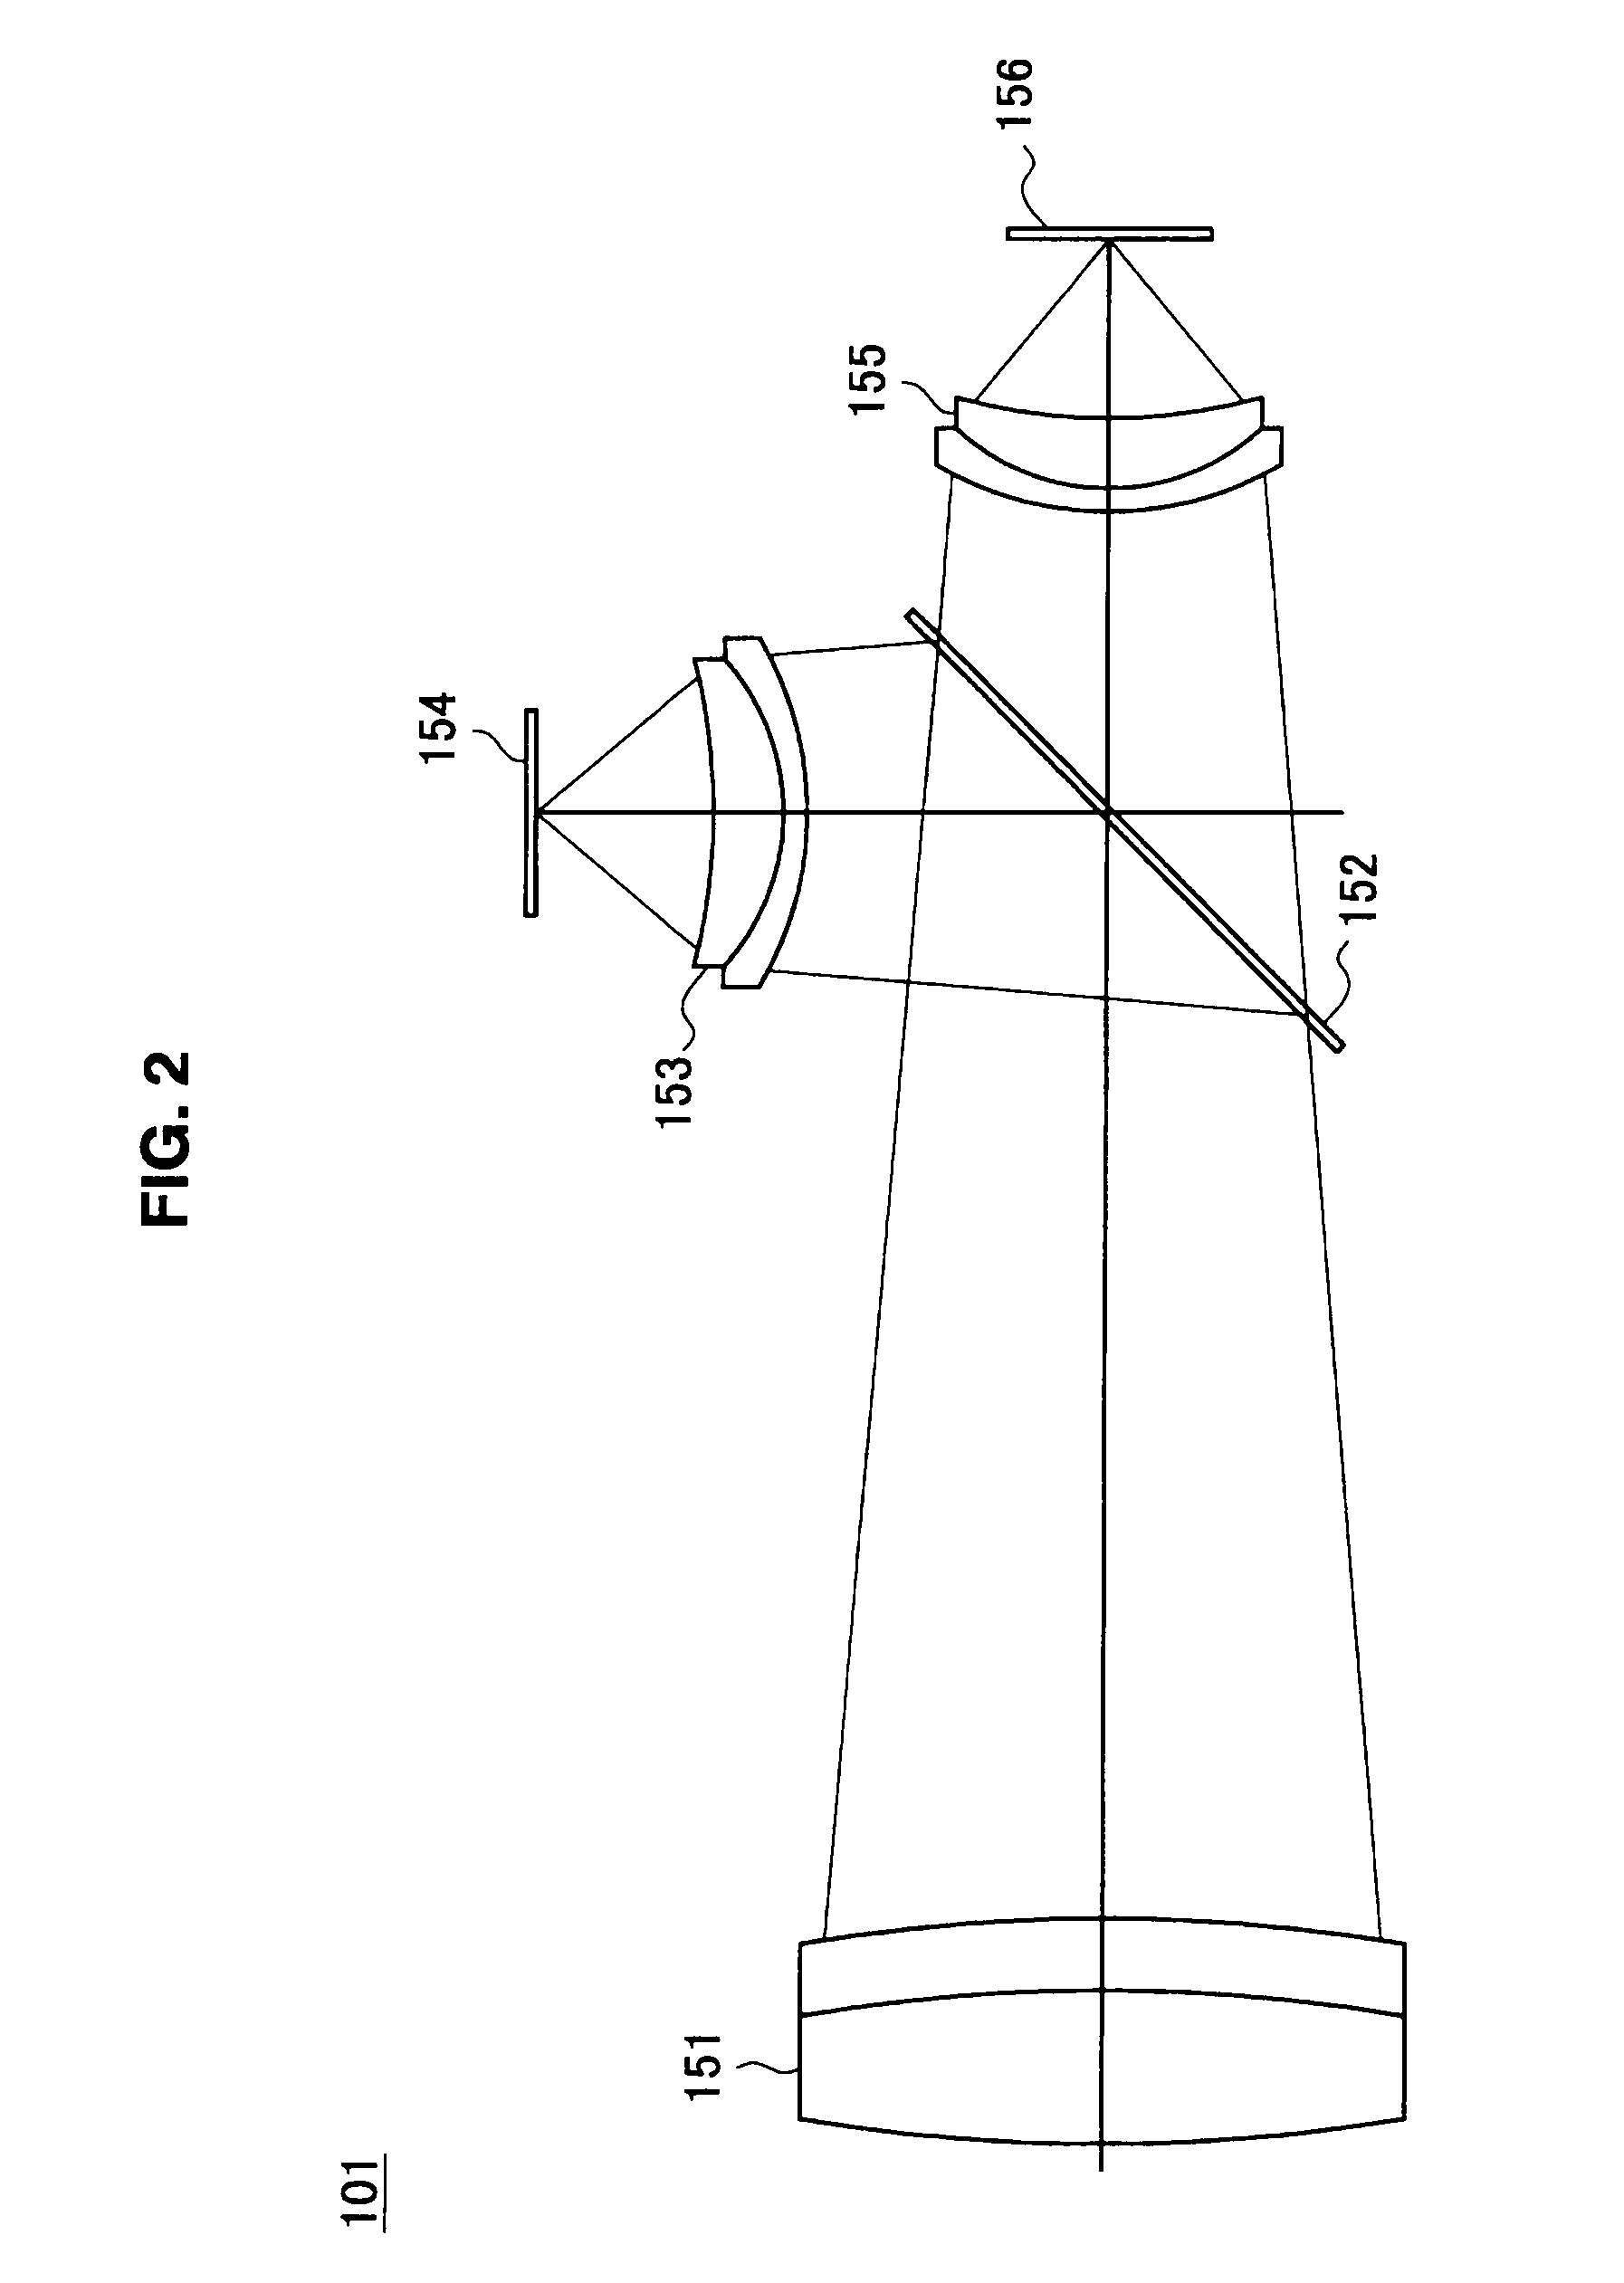 Imaging apparatus comprising color image pickup device and monochrome image pickup device